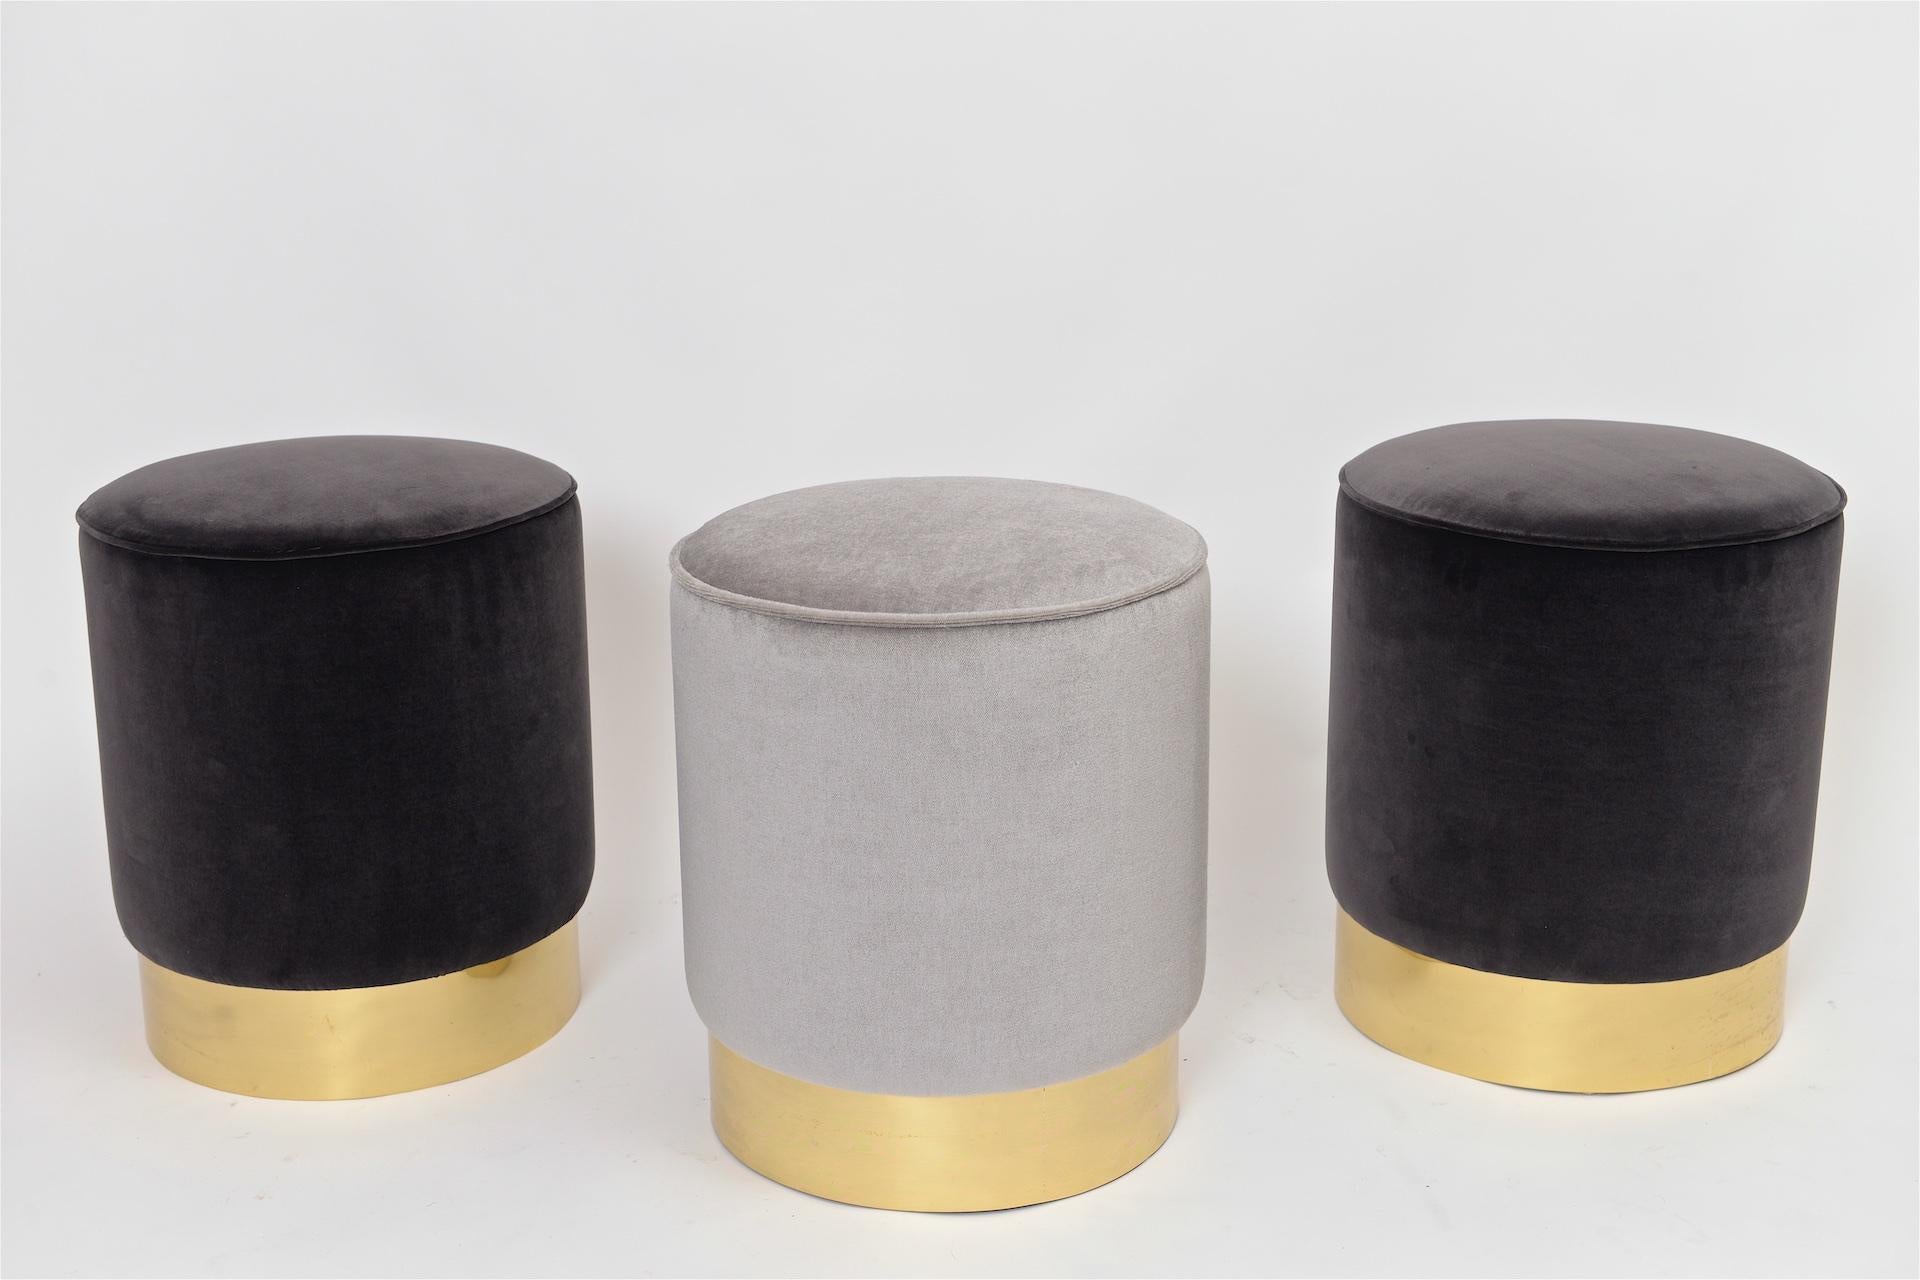 Three cylindrical stools / ottomans similar to Azucena
re-upholstered

Two dark grey 100% cotton velvet

One available in light grey mohair velvet

Can be purchased individually 

Also, now available to order in other colors.